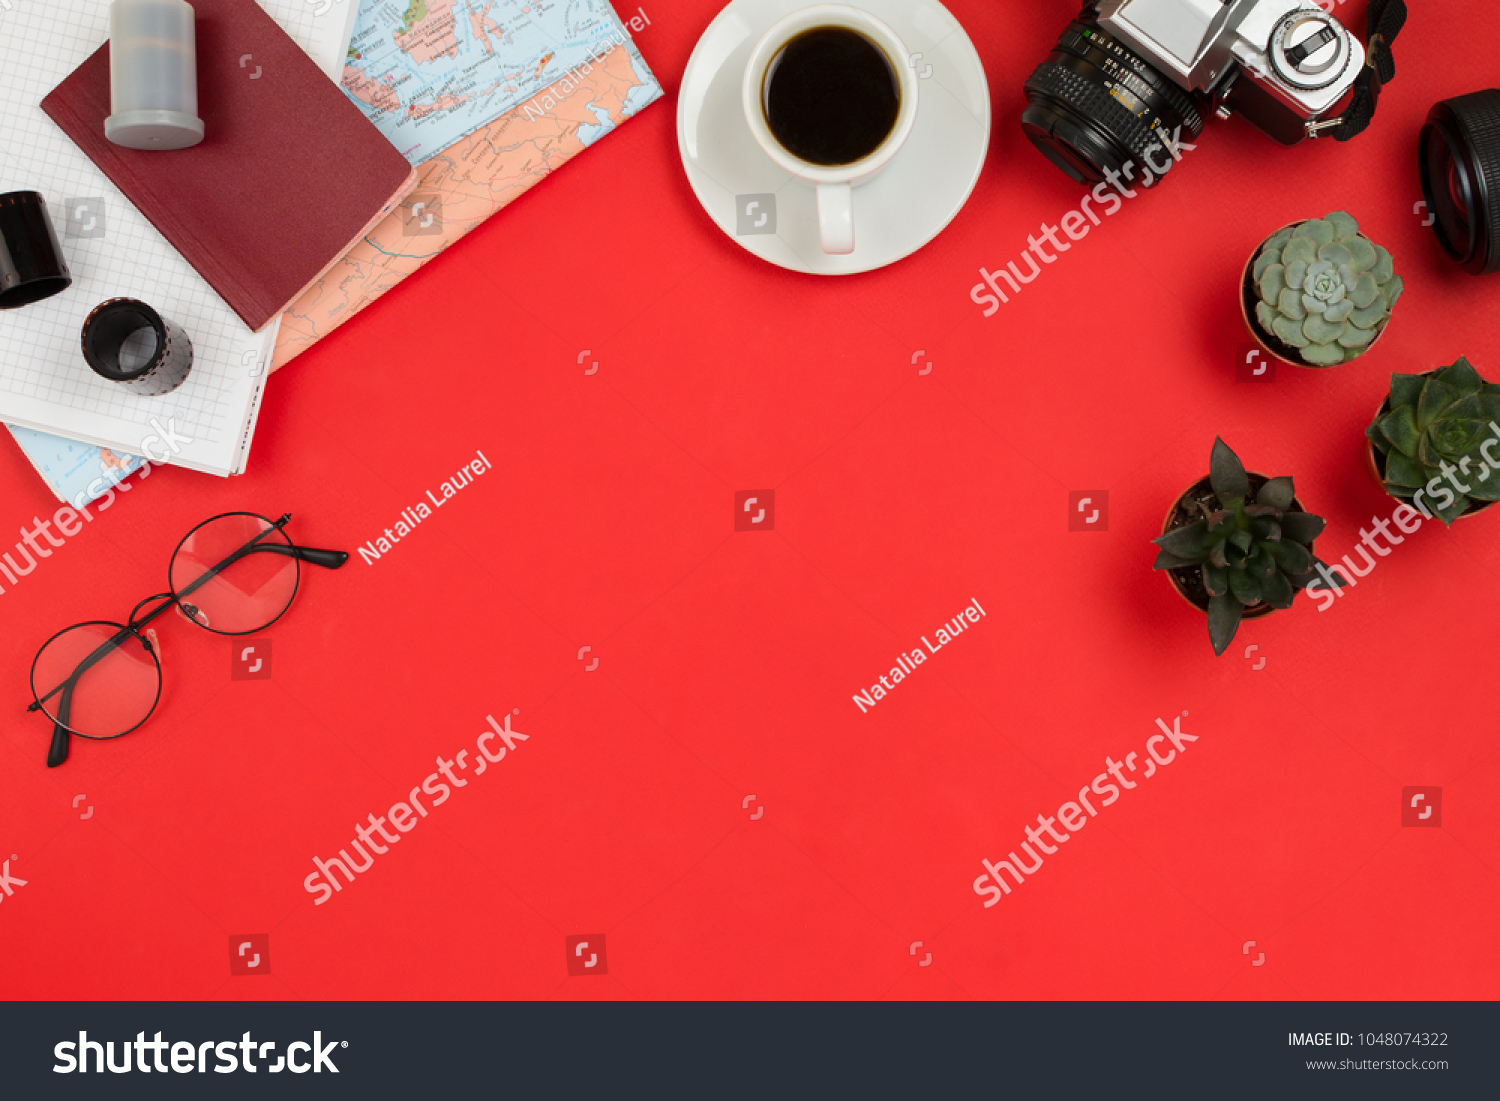 Flatlay frame arrangement with vintage film camera, lenses, glasses,  notebook, map, cup of coffee and succulents. Travel, planning or business mockup, red background, copyspace #1048074322